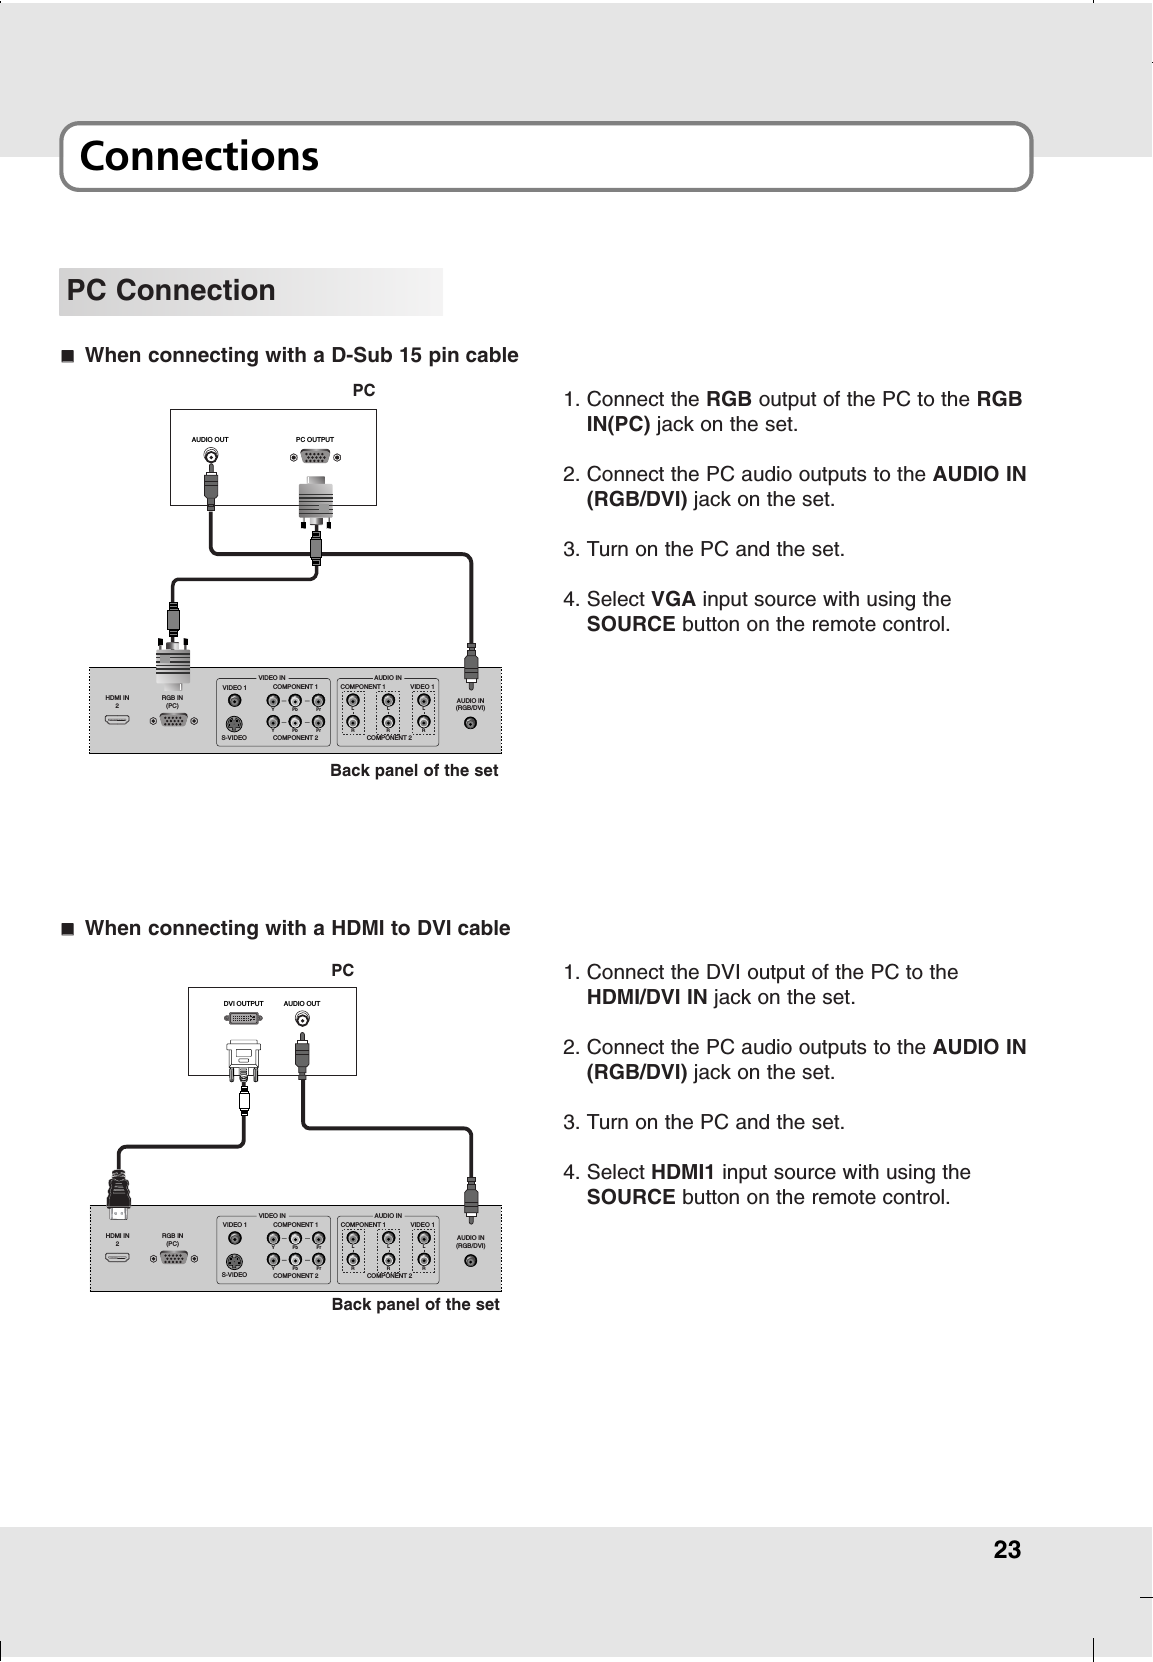 23ConnectionsPC ConnectionHDMI IN2RGB IN(PC) AUDIO IN(RGB/DVI)COMPONENT 2COMPONENT 1S-VIDEOYPb PrCOMPONENT 2YPb PrVIDEO 1VIDEO INCOMPONENT 1 VIDEO 1AUDIO INLRLRLRDVI OUTPUT AUDIO OUT1. Connect the DVI output of the PC to theHDMI/DVI IN jack on the set.2. Connect the PC audio outputs to the AUDIO IN(RGB/DVI) jack on the set.3. Turn on the PC and the set.4. Select HDMI1 input source with using theSOURCE button on the remote control.AAWhen connecting with a HDMI to DVI cableHDMI IN2RGB IN(PC) AUDIO IN(RGB/DVI)COMPONENT 2COMPONENT 1S-VIDEOYPb PrCOMPONENT 2YPb PrVIDEO 1VIDEO INCOMPONENT 1 VIDEO 1AUDIO INLRLRLRAUDIO OUT PC OUTPUT1. Connect the RGB output of the PC to the RGBIN(PC) jack on the set.2. Connect the PC audio outputs to the AUDIO IN(RGB/DVI) jack on the set.3. Turn on the PC and the set.4. Select VGA input source with using theSOURCE button on the remote control.AAWhen connecting with a D-Sub 15 pin cablePCBack panel of the setPCBack panel of the set